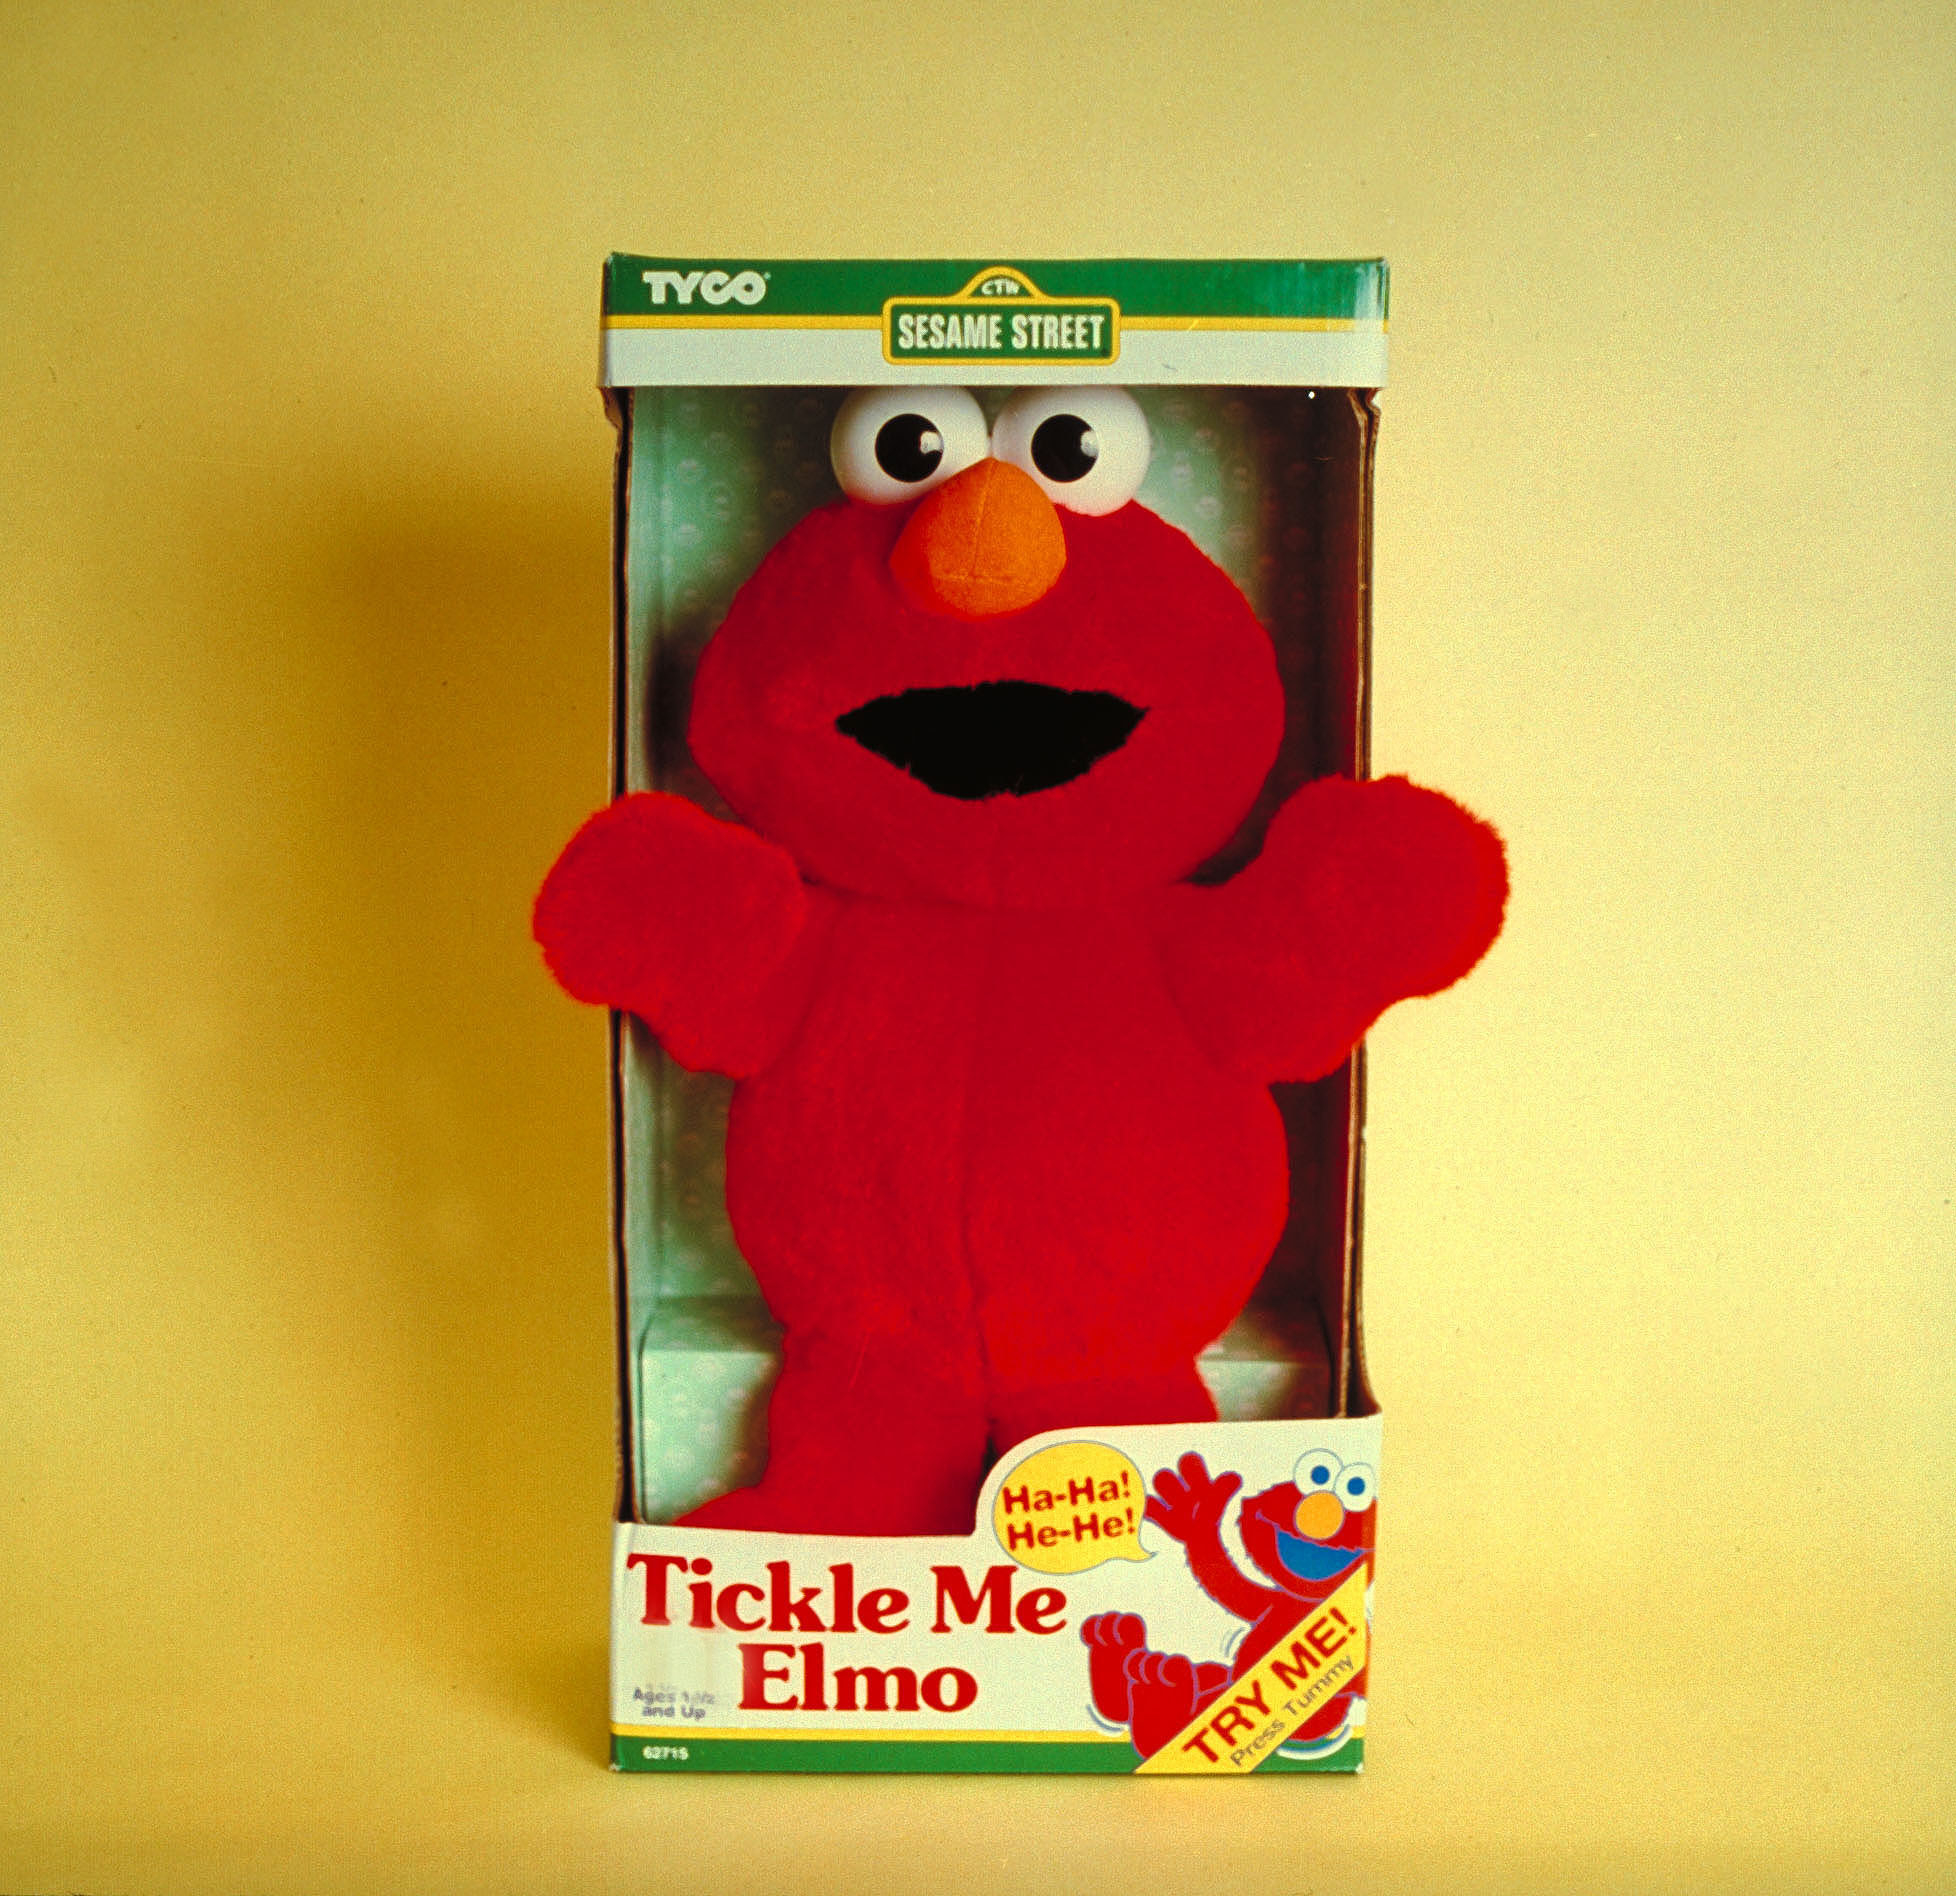 A Tickle Me Elmo doll in its package with a yellow background